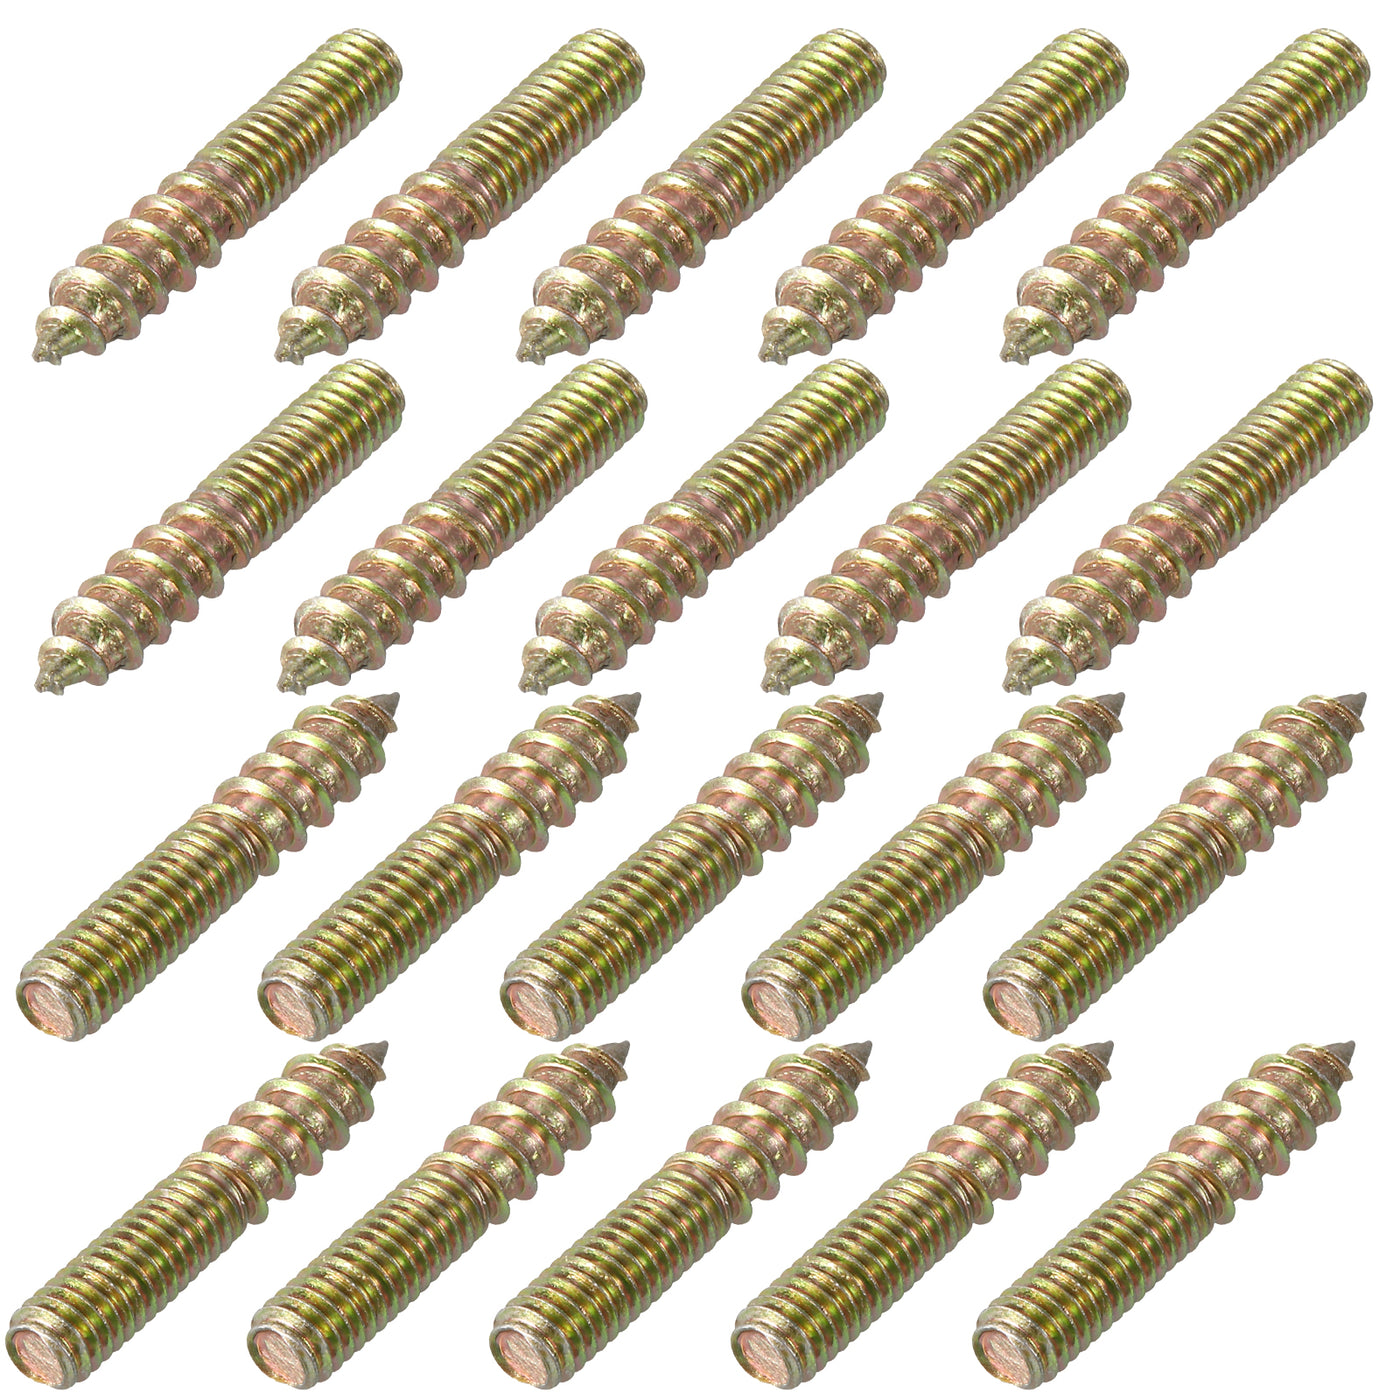 uxcell Uxcell 40Pcs M6x30mm Hanger Bolt Double Headed Bolt Self-Tapping Screw for Furniture